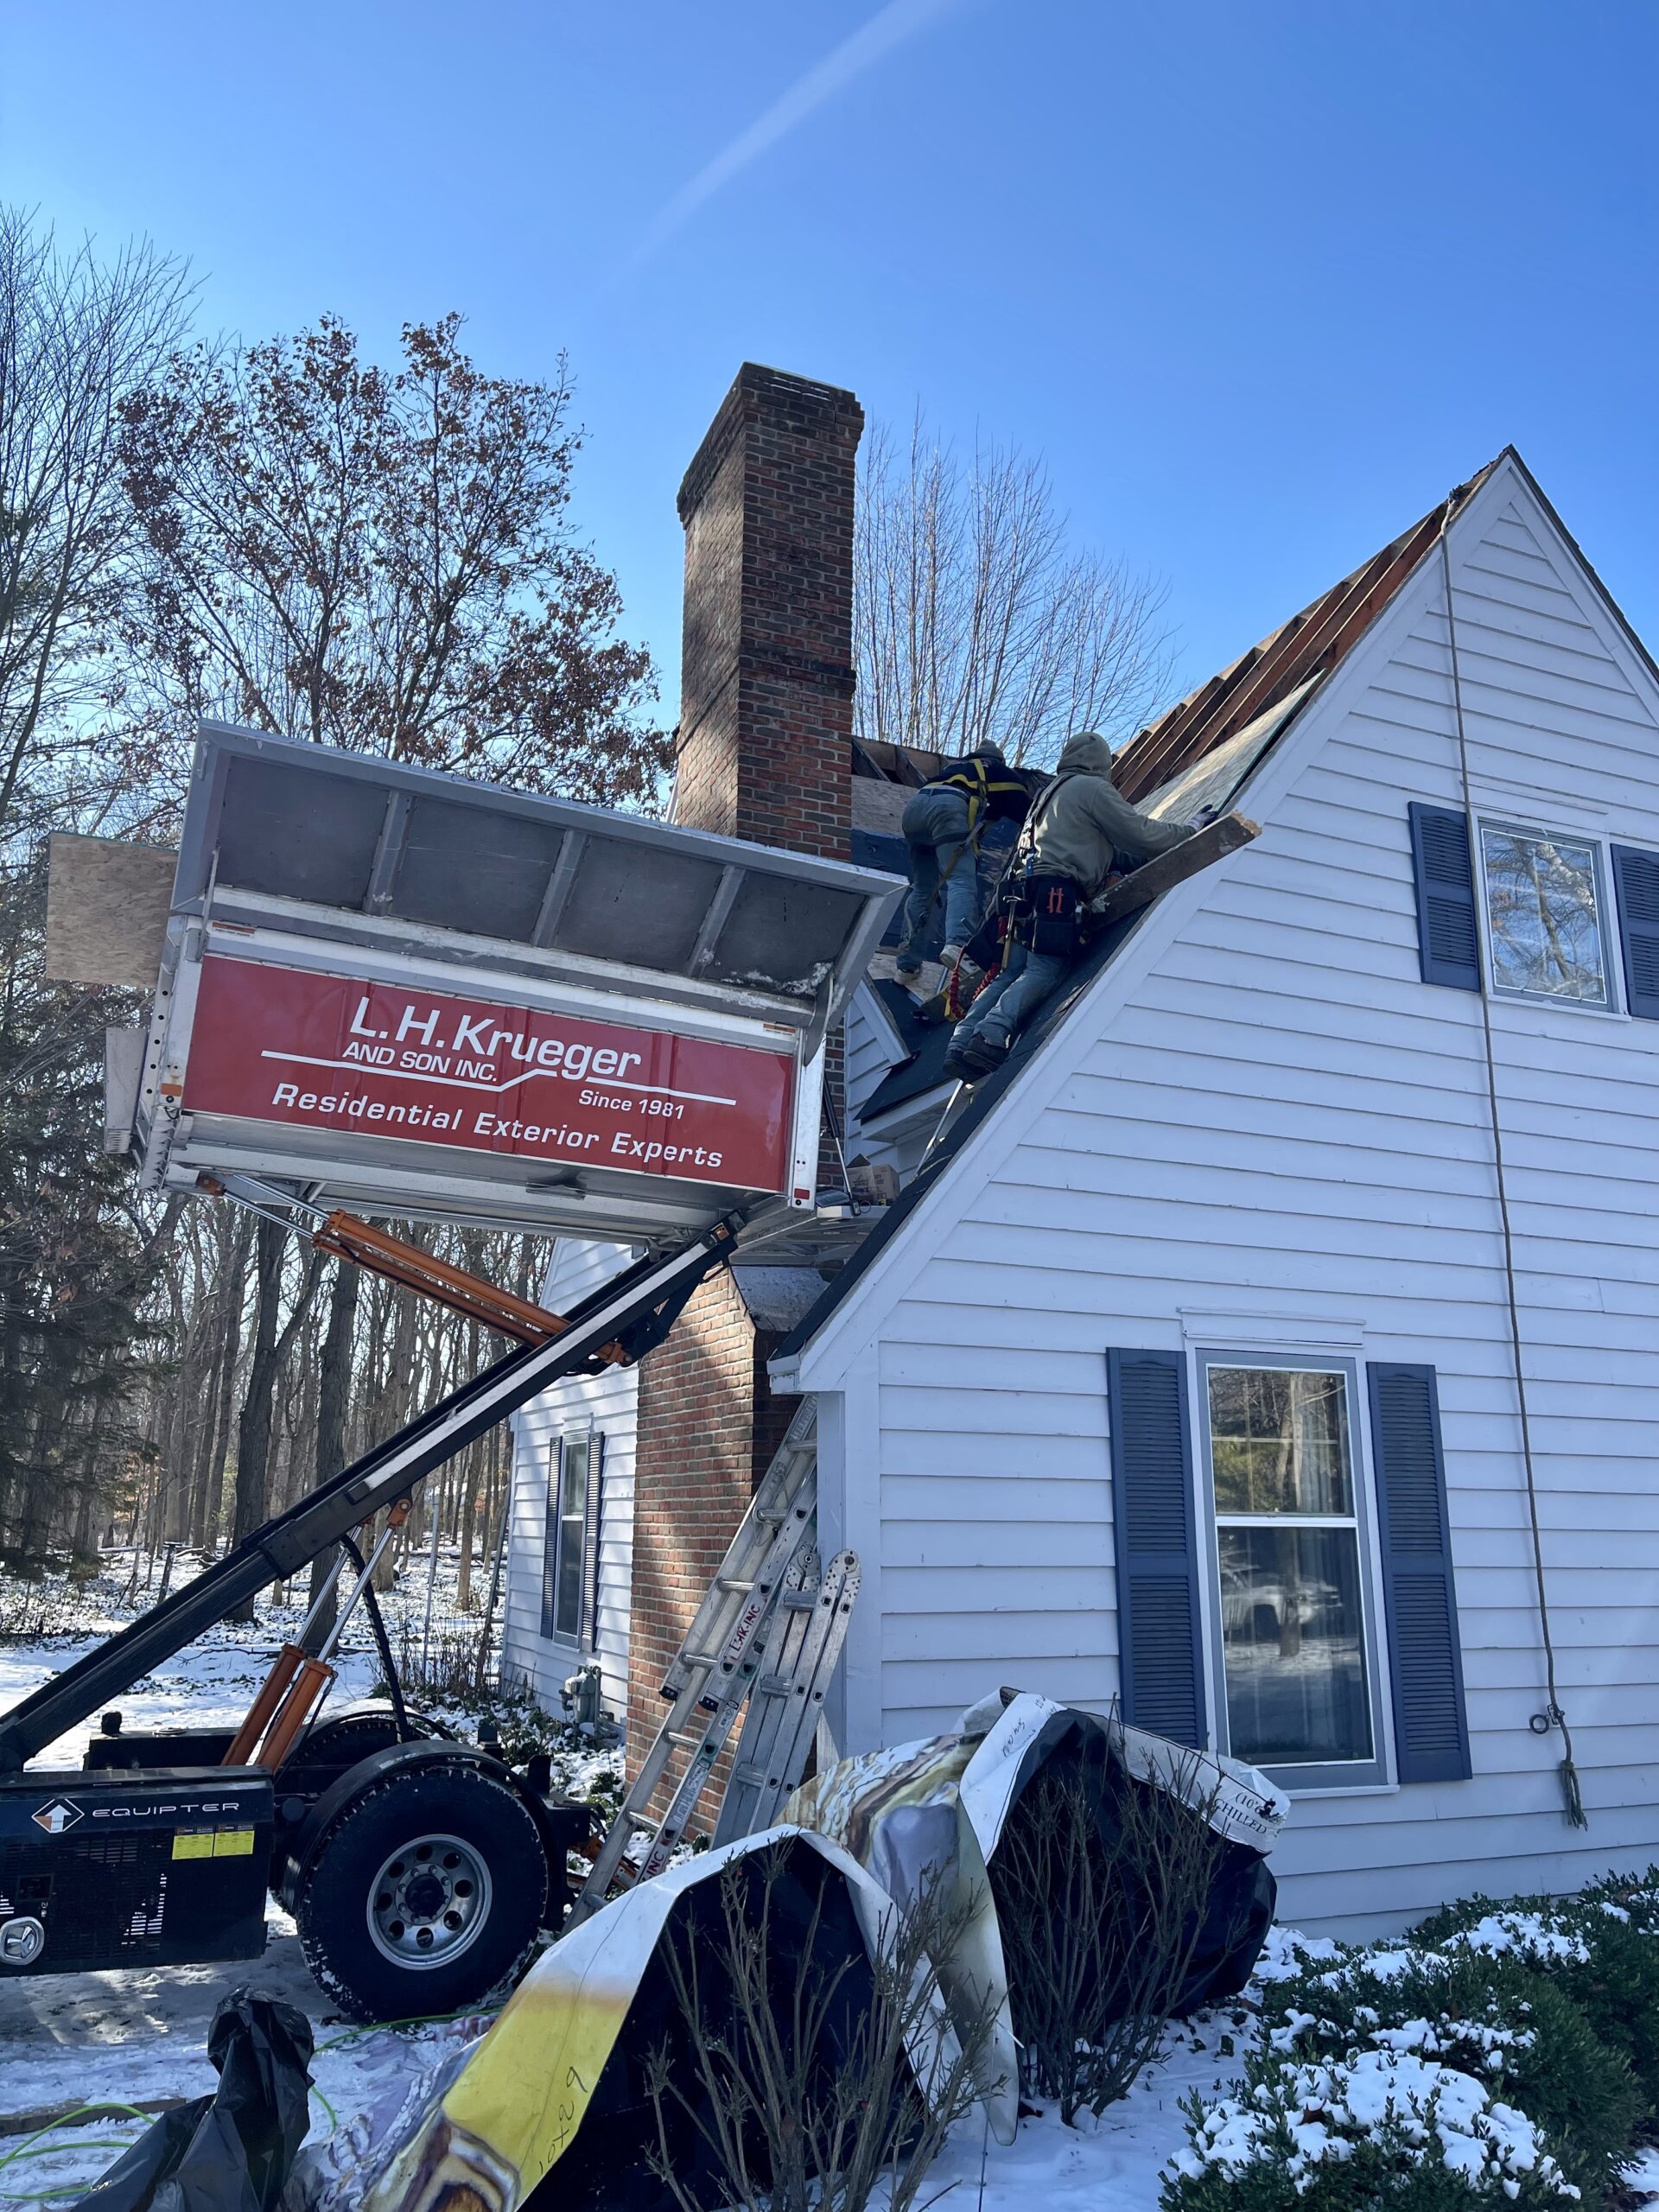 L.H. Krueger and Son working on re-roofing a home in Delafield, WI